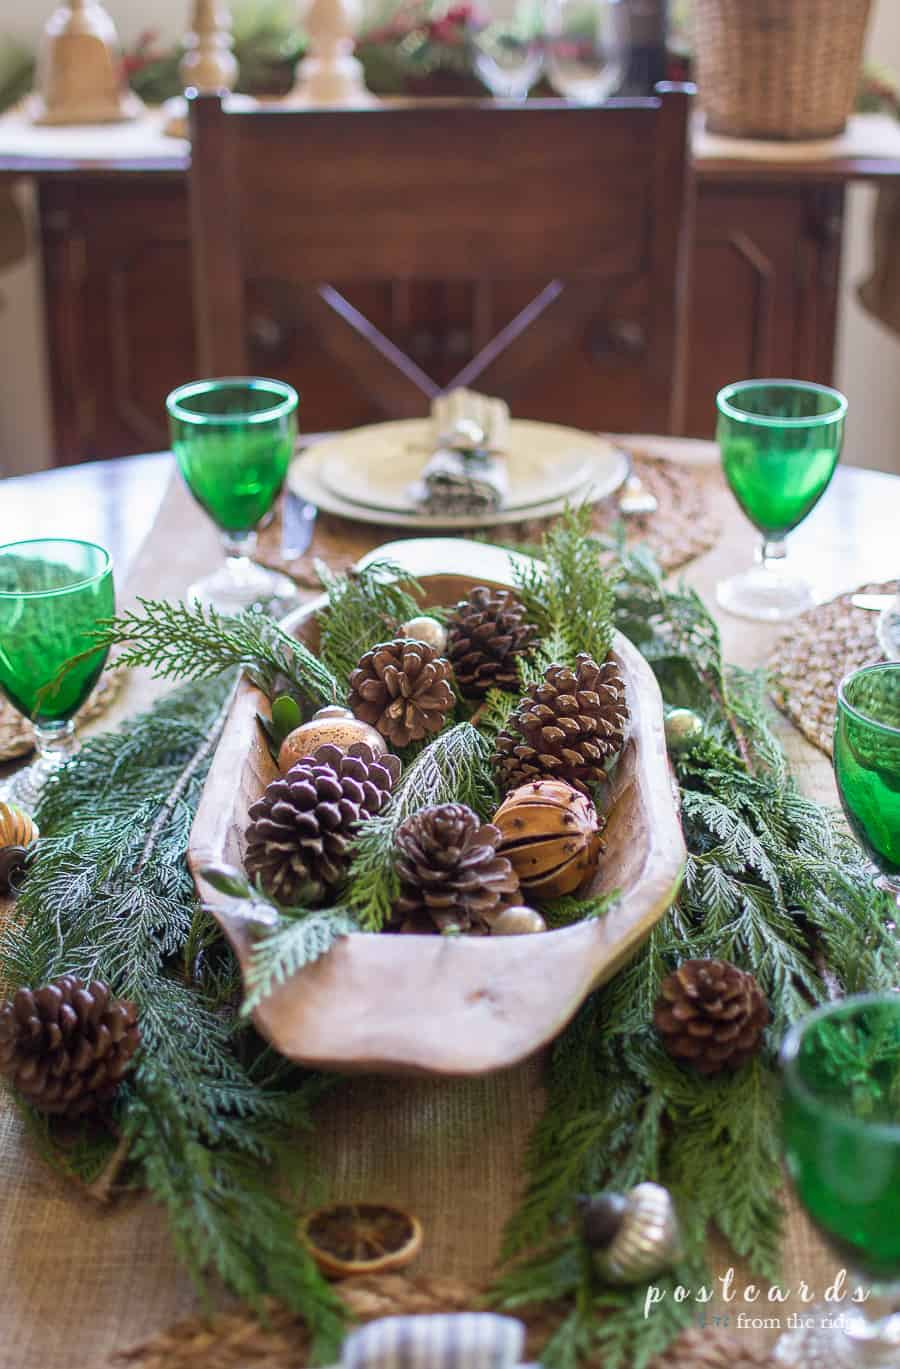 wooden dough bowl filled with pine cones and other natural items on a Christmas table